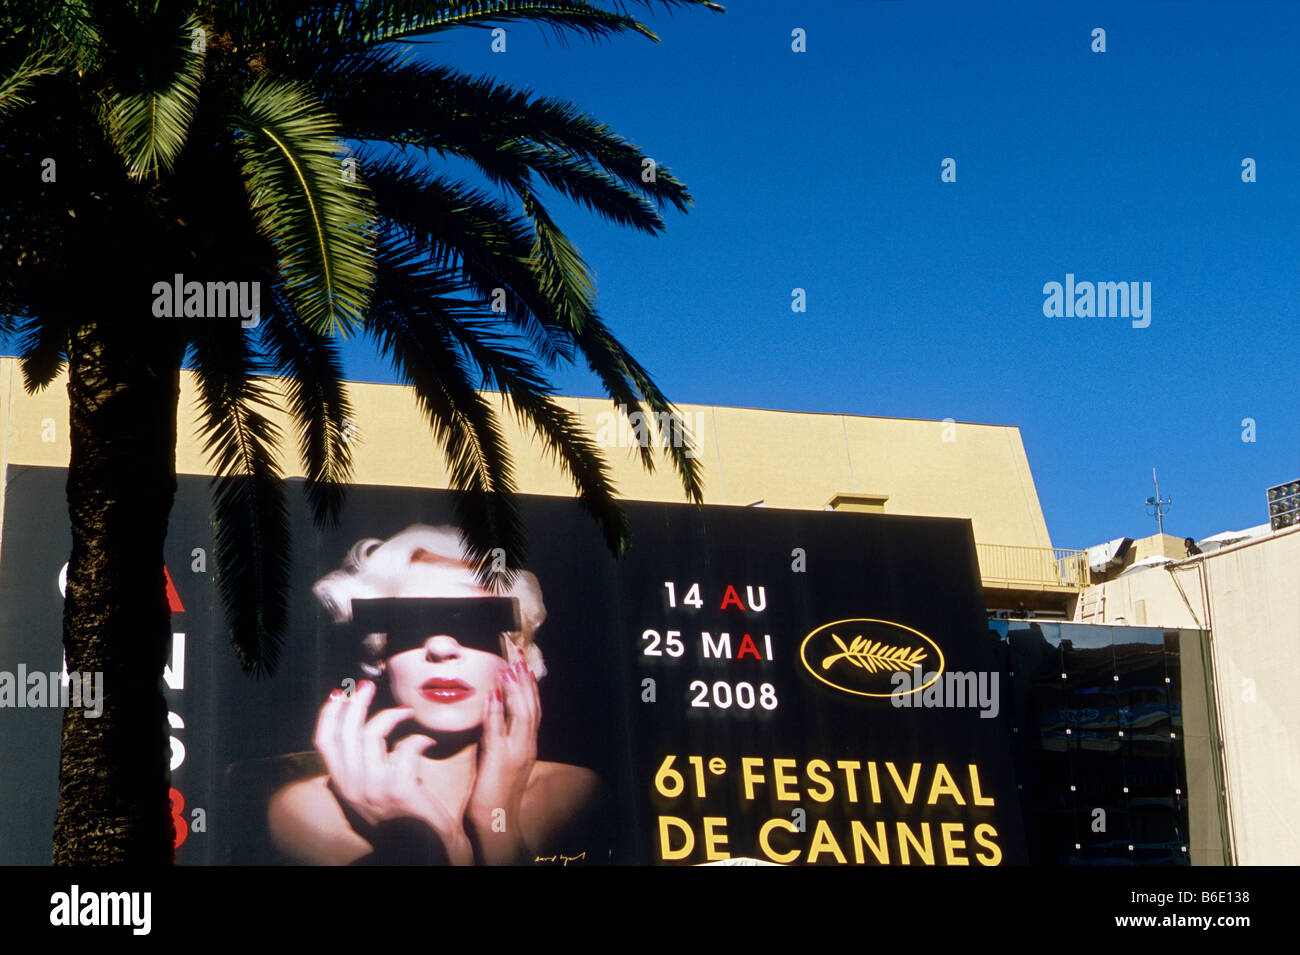 Cannes movie festival palace Stock Photo